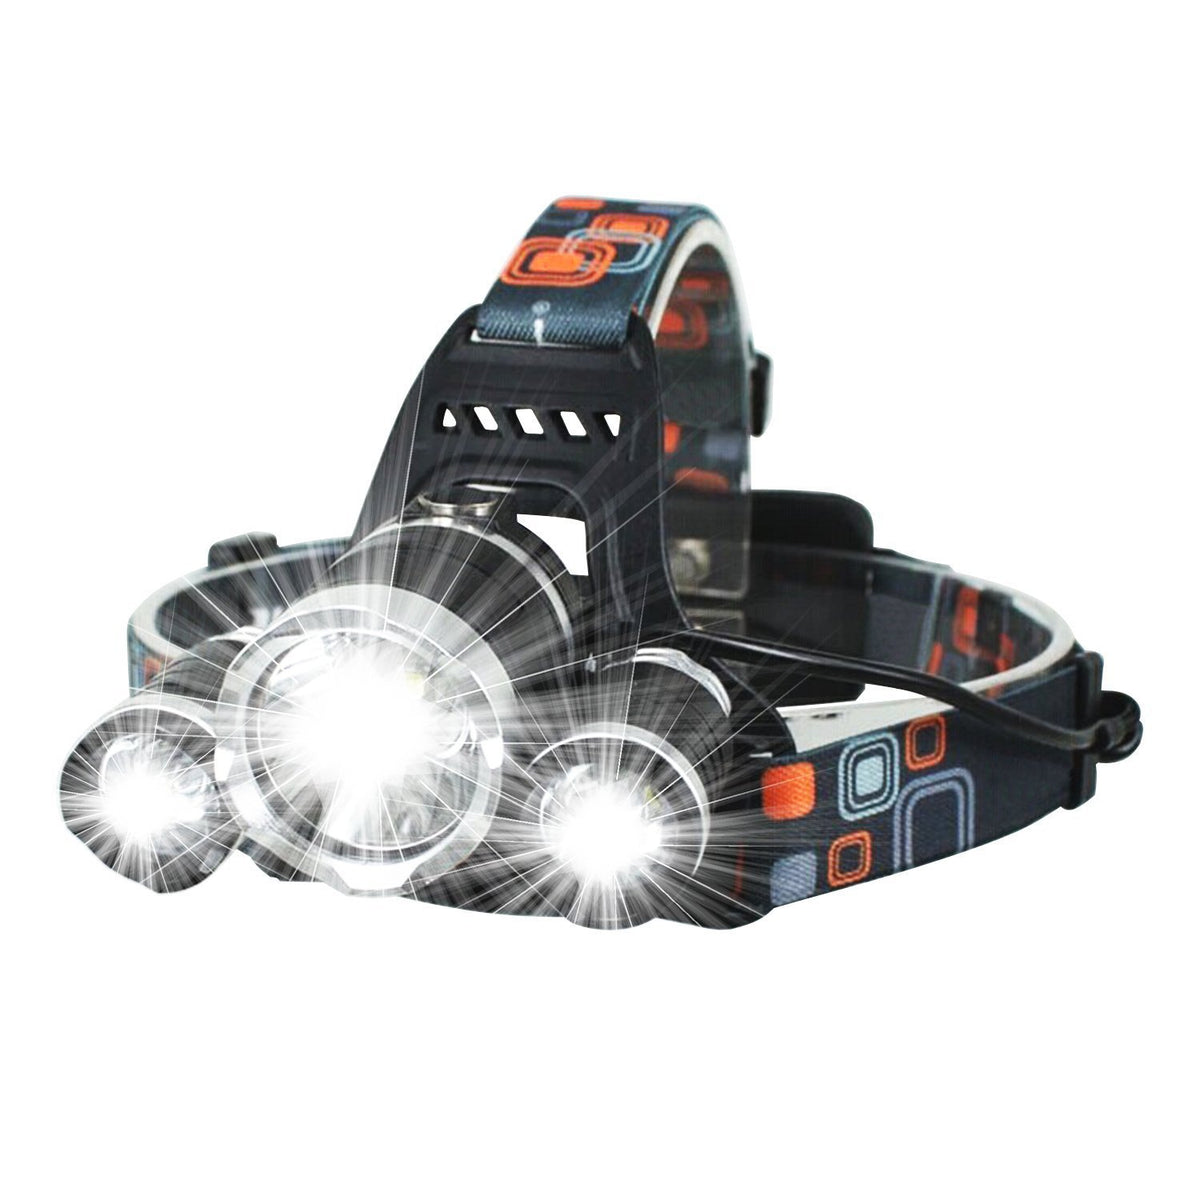 Drop Shipping Rechargeable Zoom Led Headlamp Fishing Headlight Torch Hunting